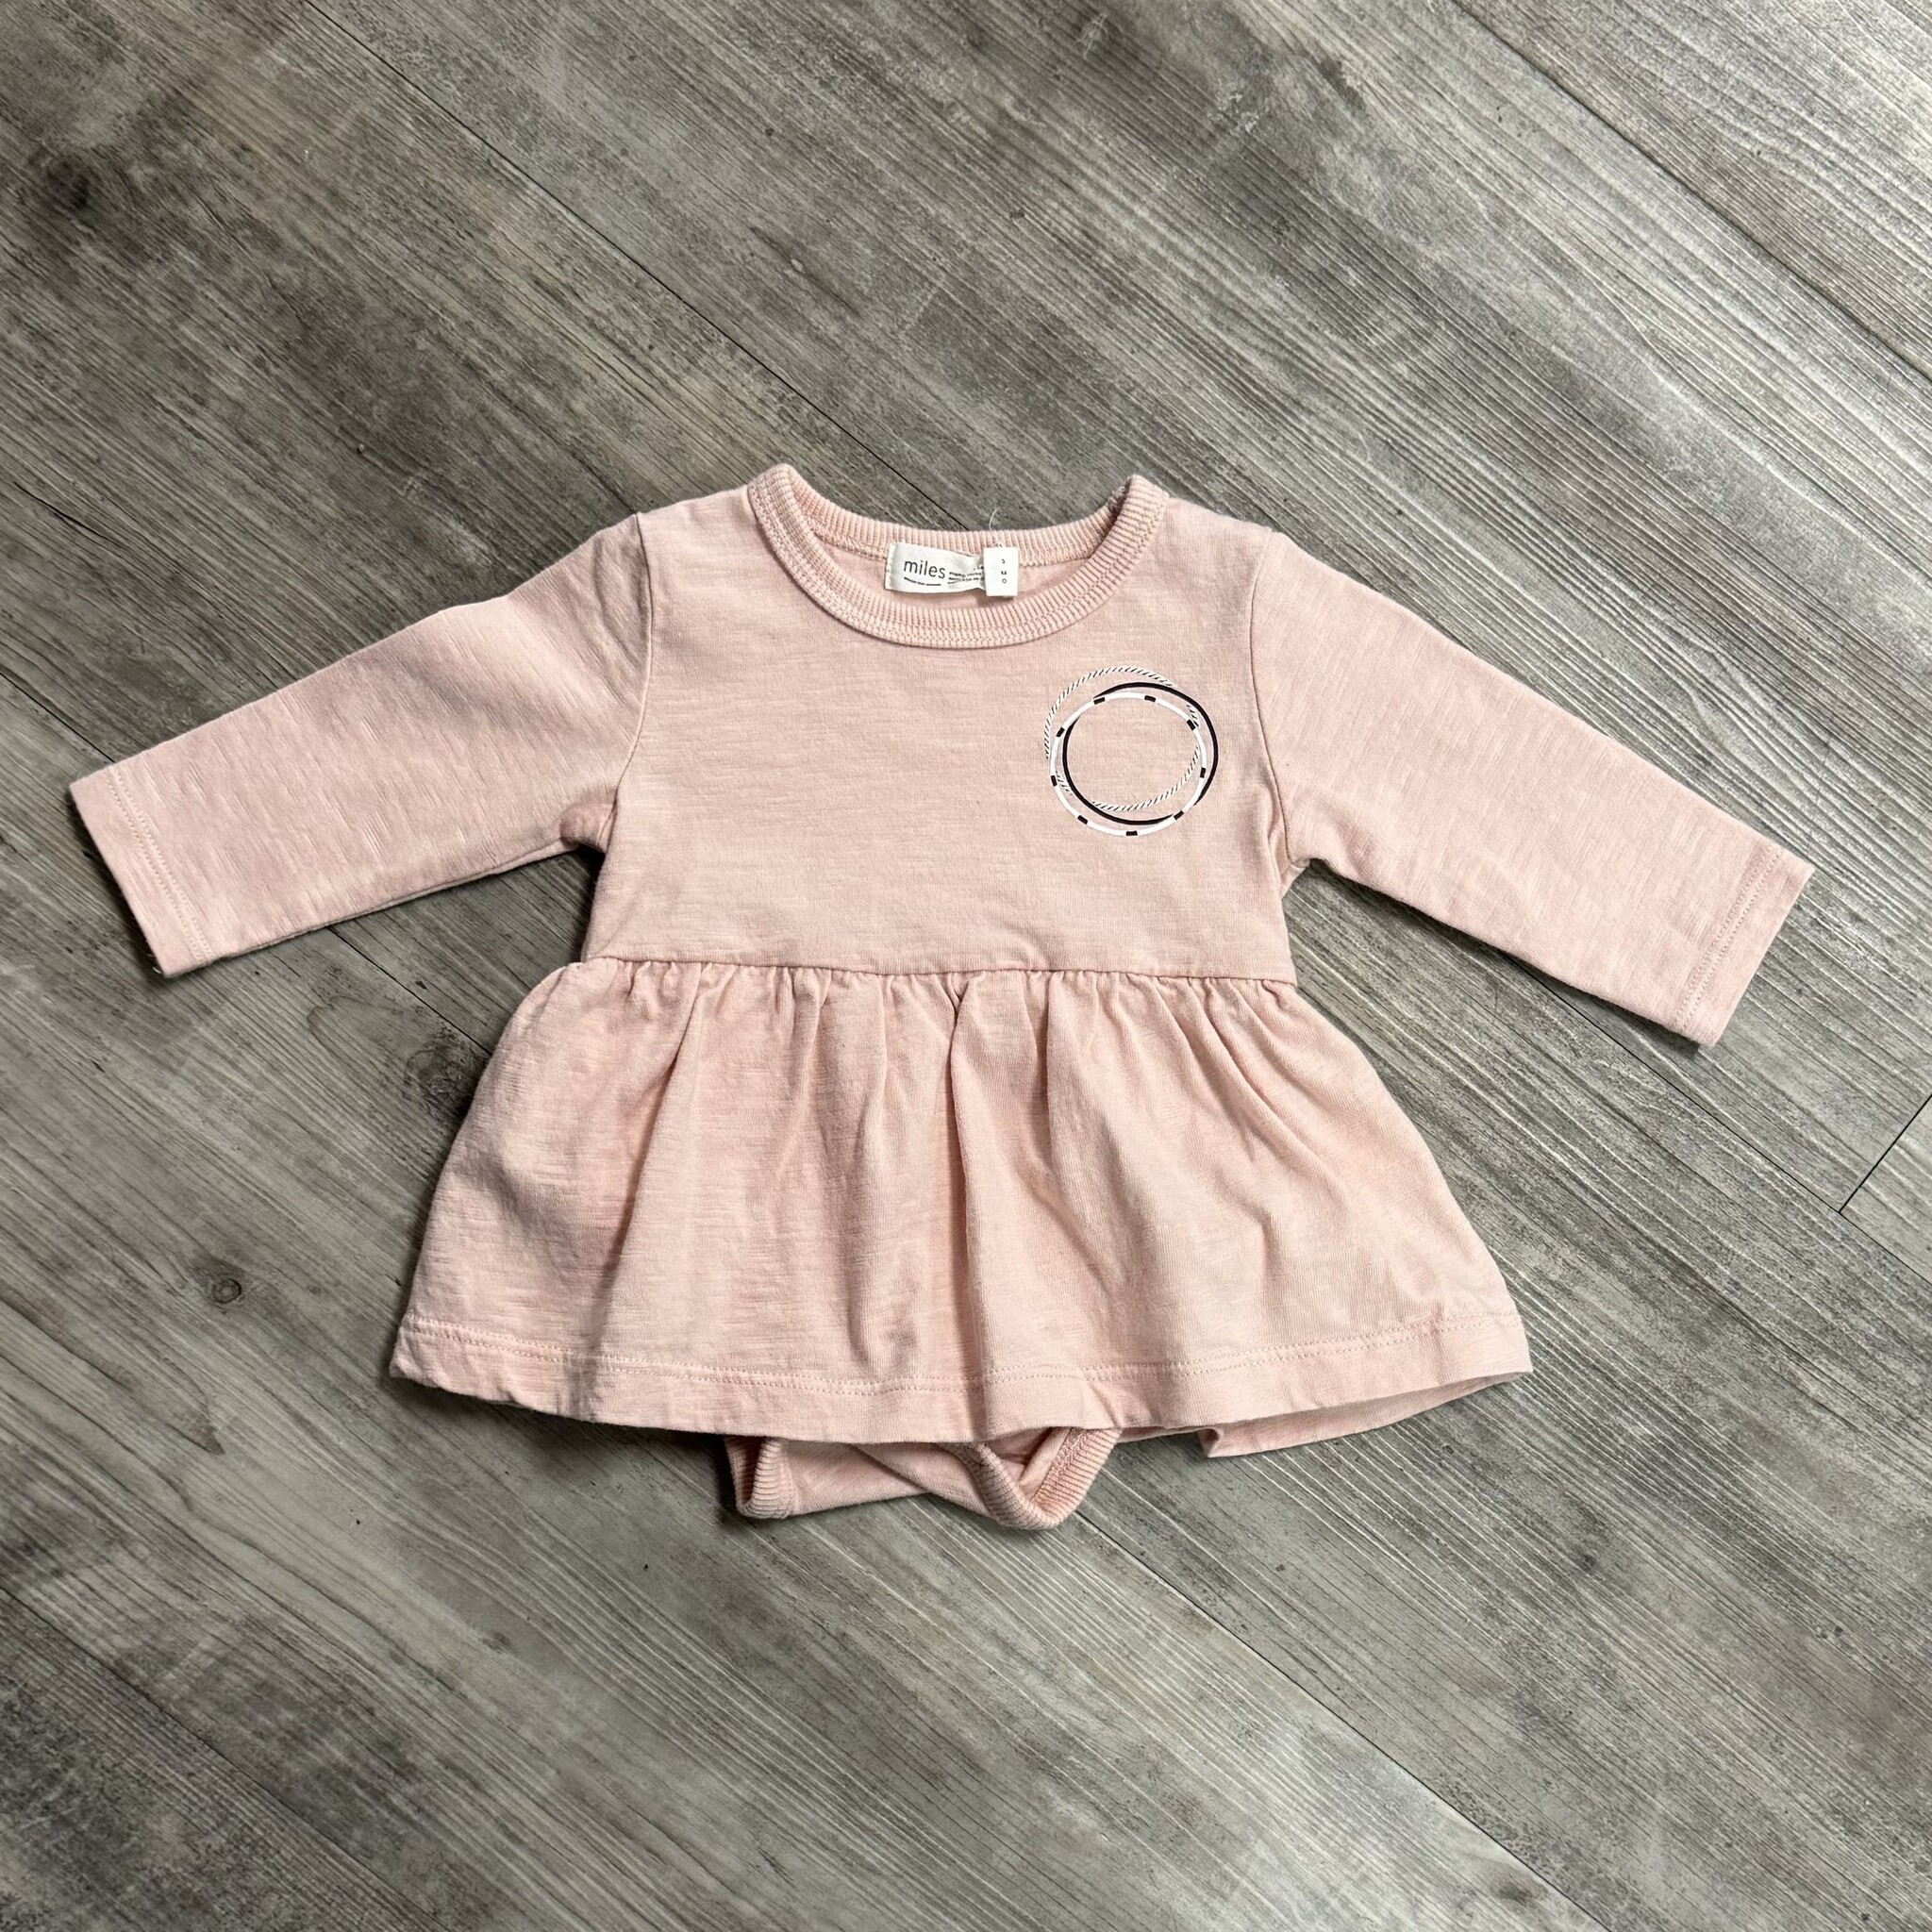 Light Pink Dress with Attached Onesie - Size 3M